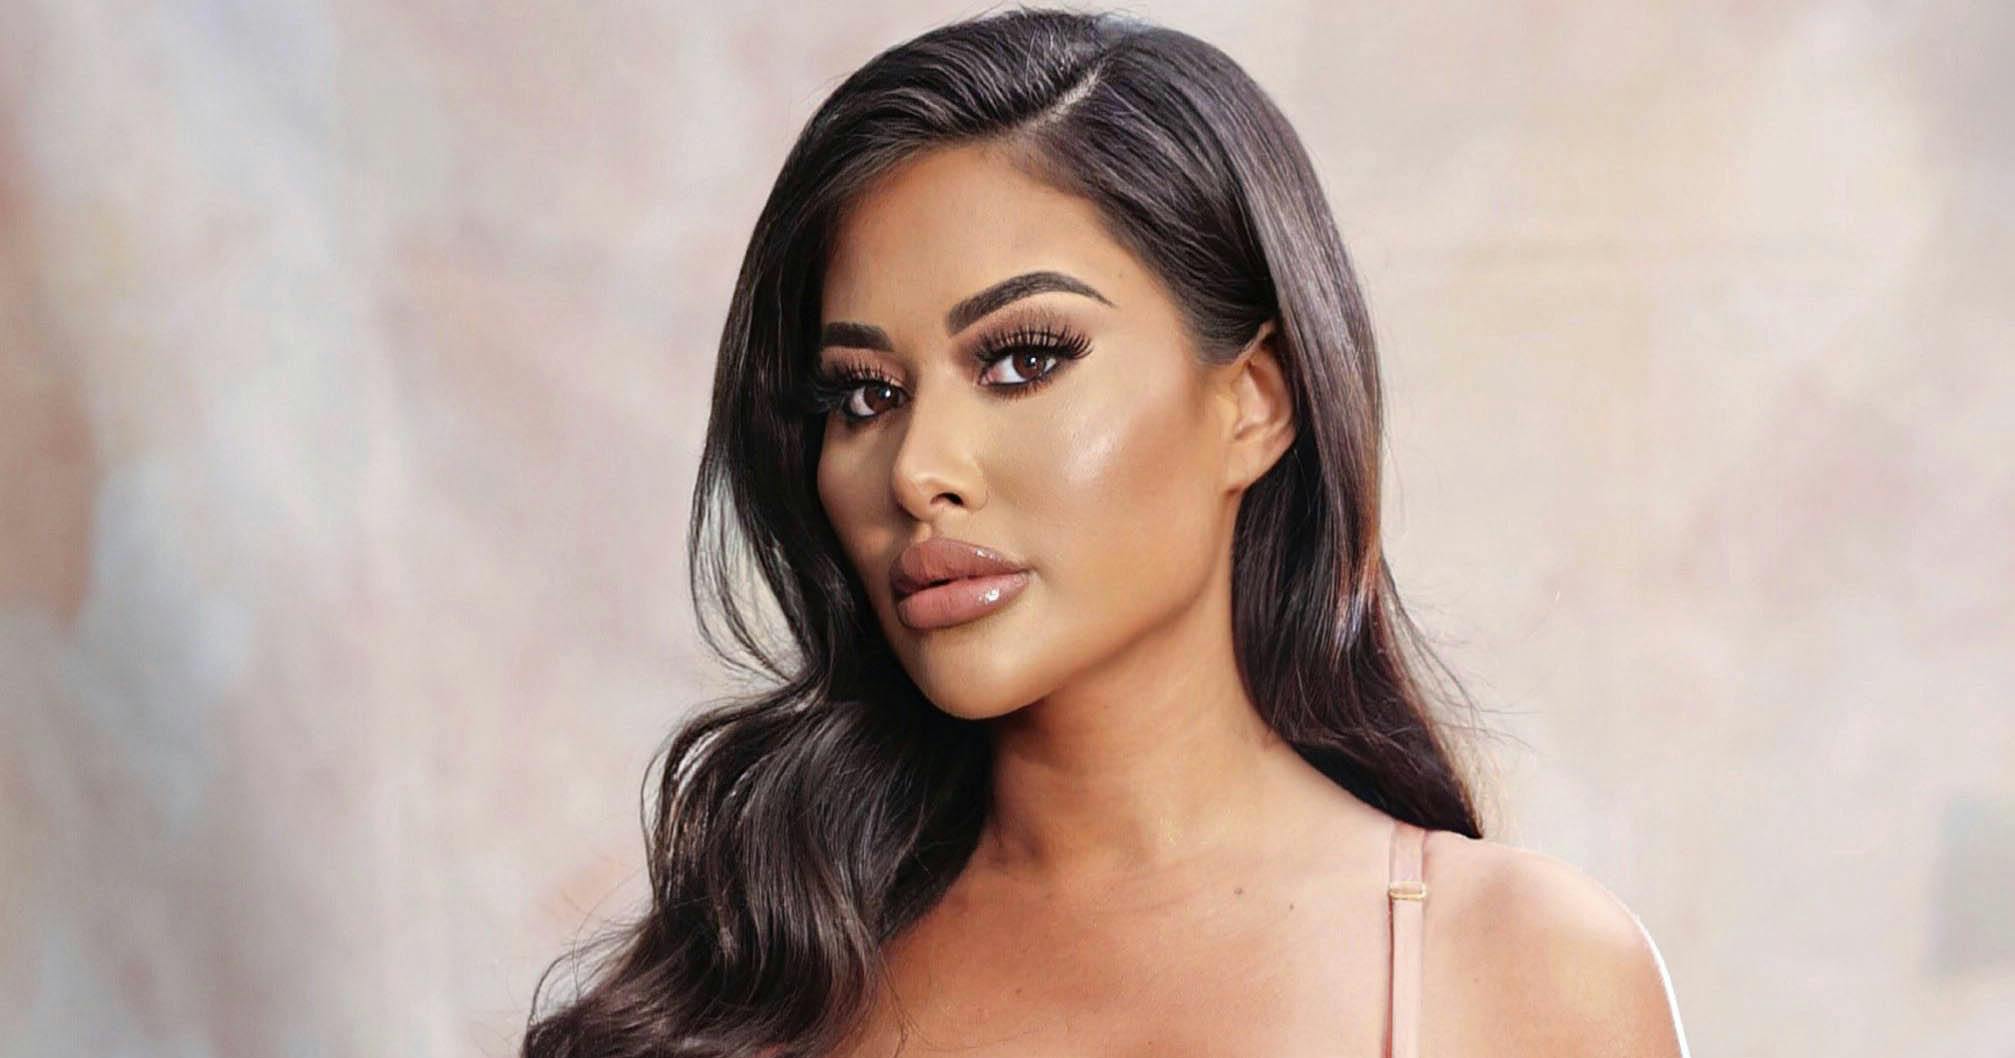 MAFS Nikita Jasmine opens up on surgery that left her with boobs bigger than her head %%channel_name%% pic